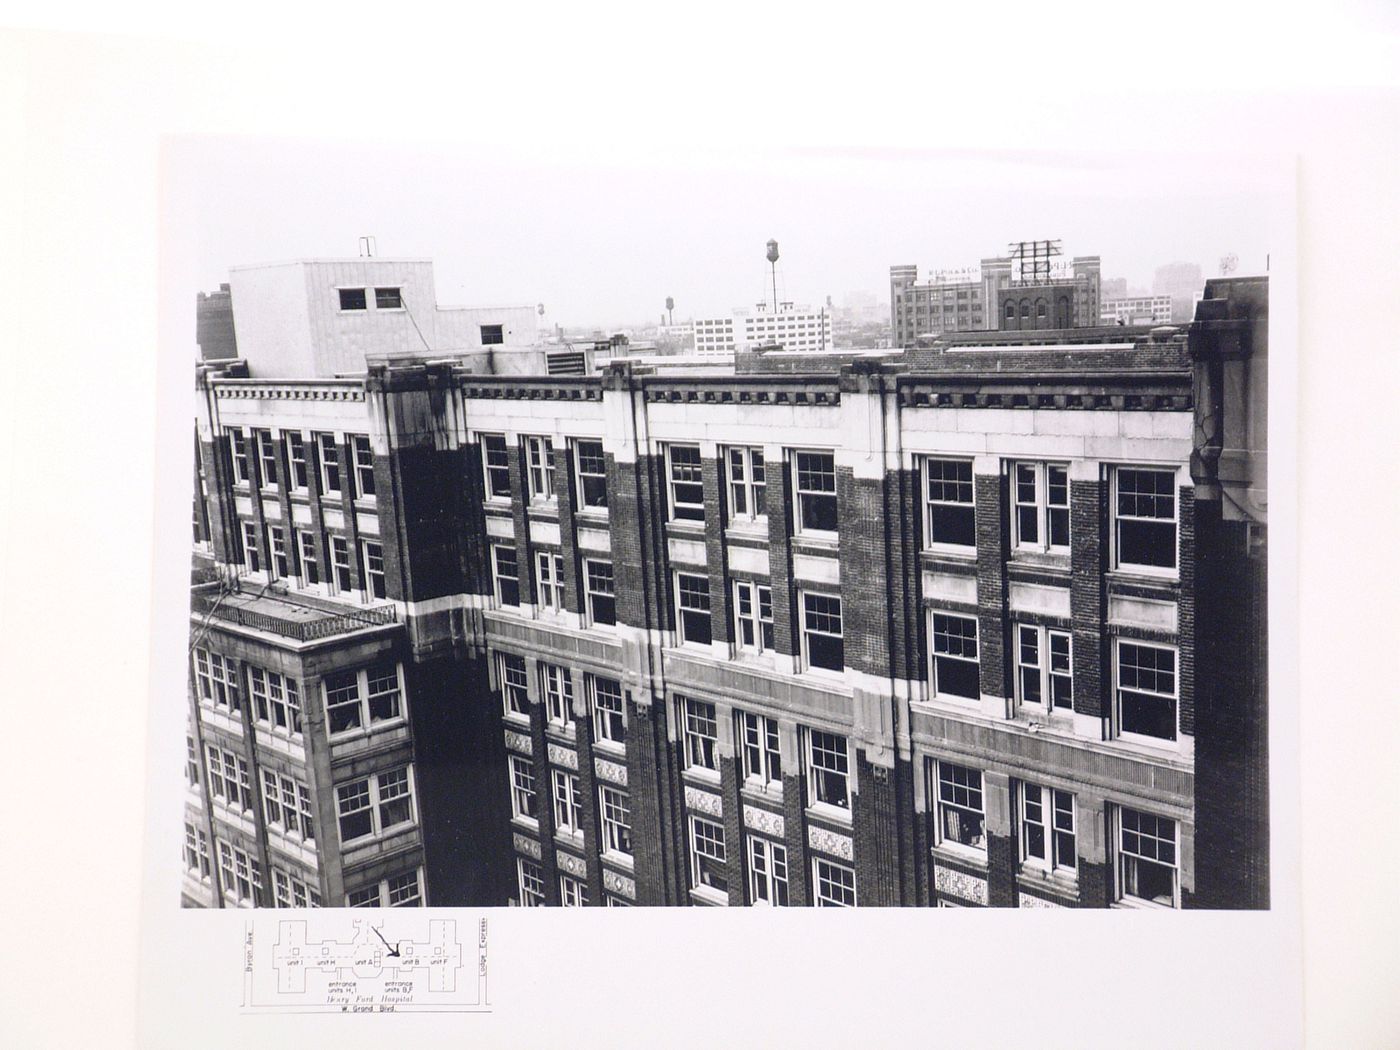 View of the top five floors of Henry Ford Hospital, West Grand Boulevard, Dearborn, Michigan